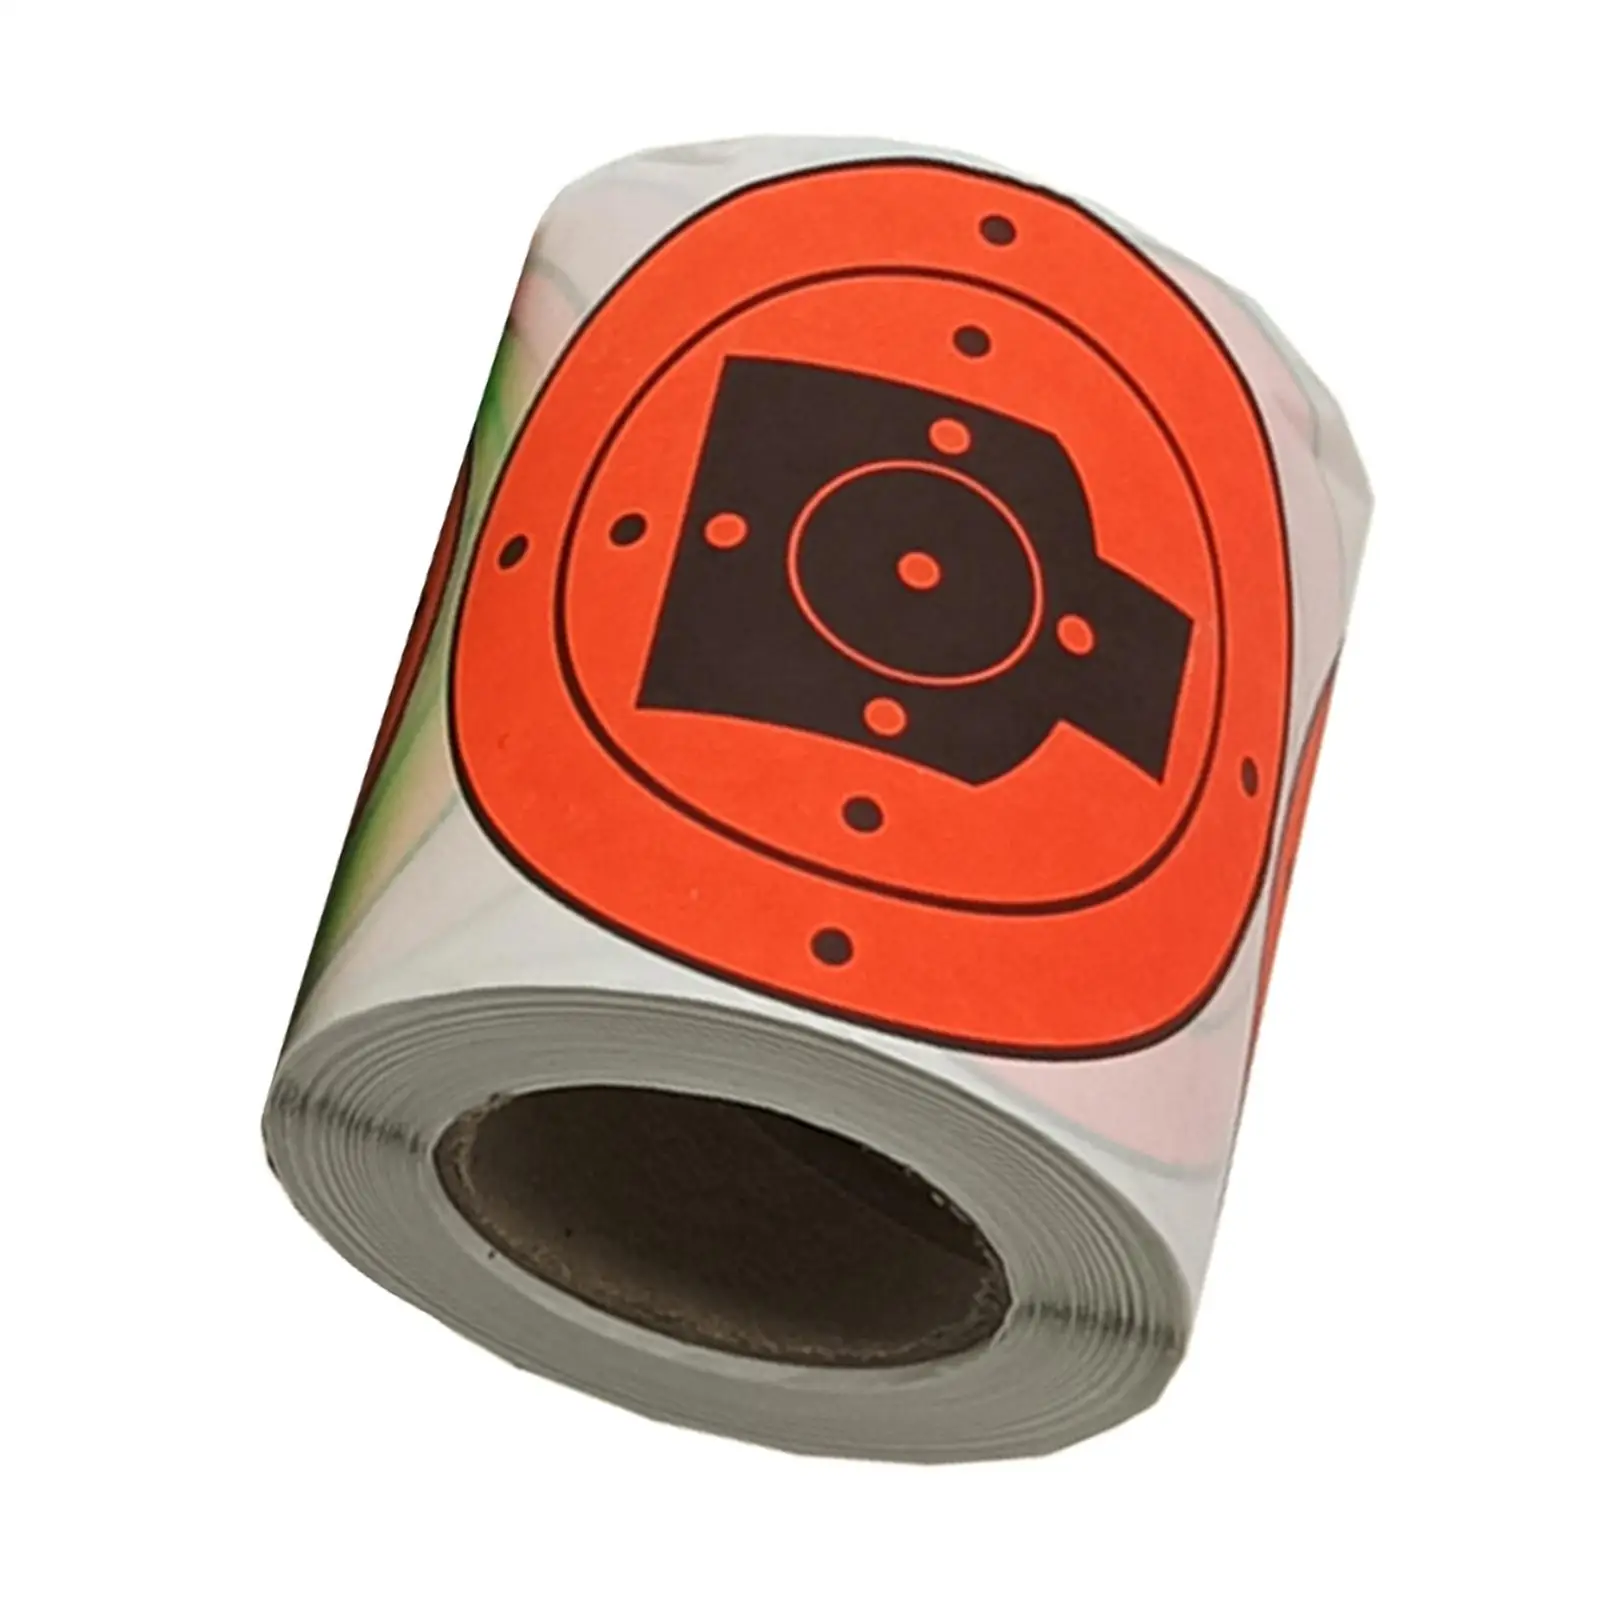 200PCS Round Shooting Targets, Hunting Targets Accessories, 3inch Shooting Exercise Self Adhesive Targets Stickers